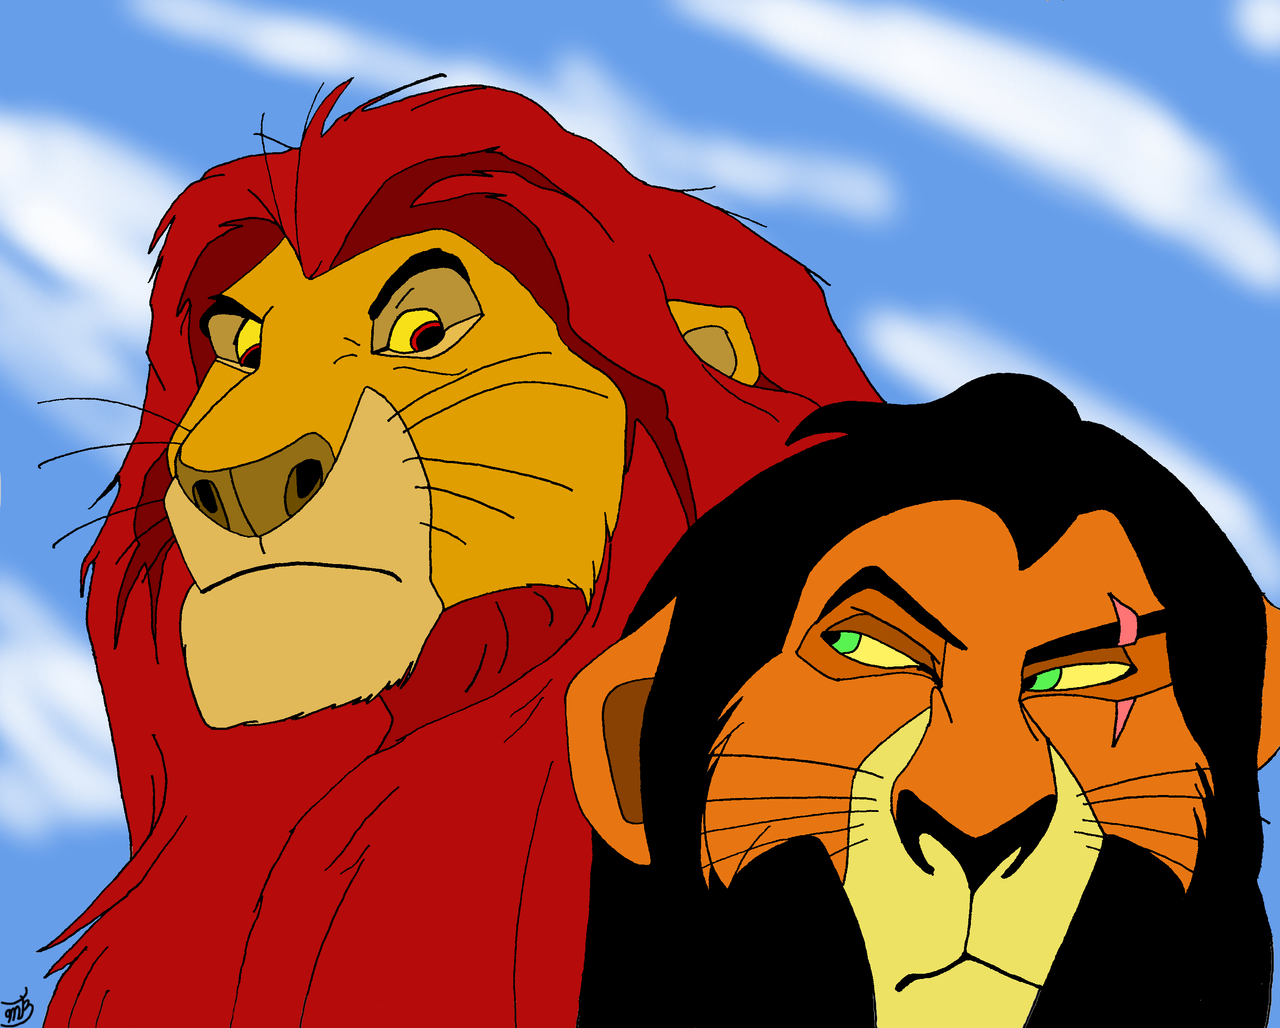 mufasa_and_scar_by_erinbaka1090-d5vftpb.png